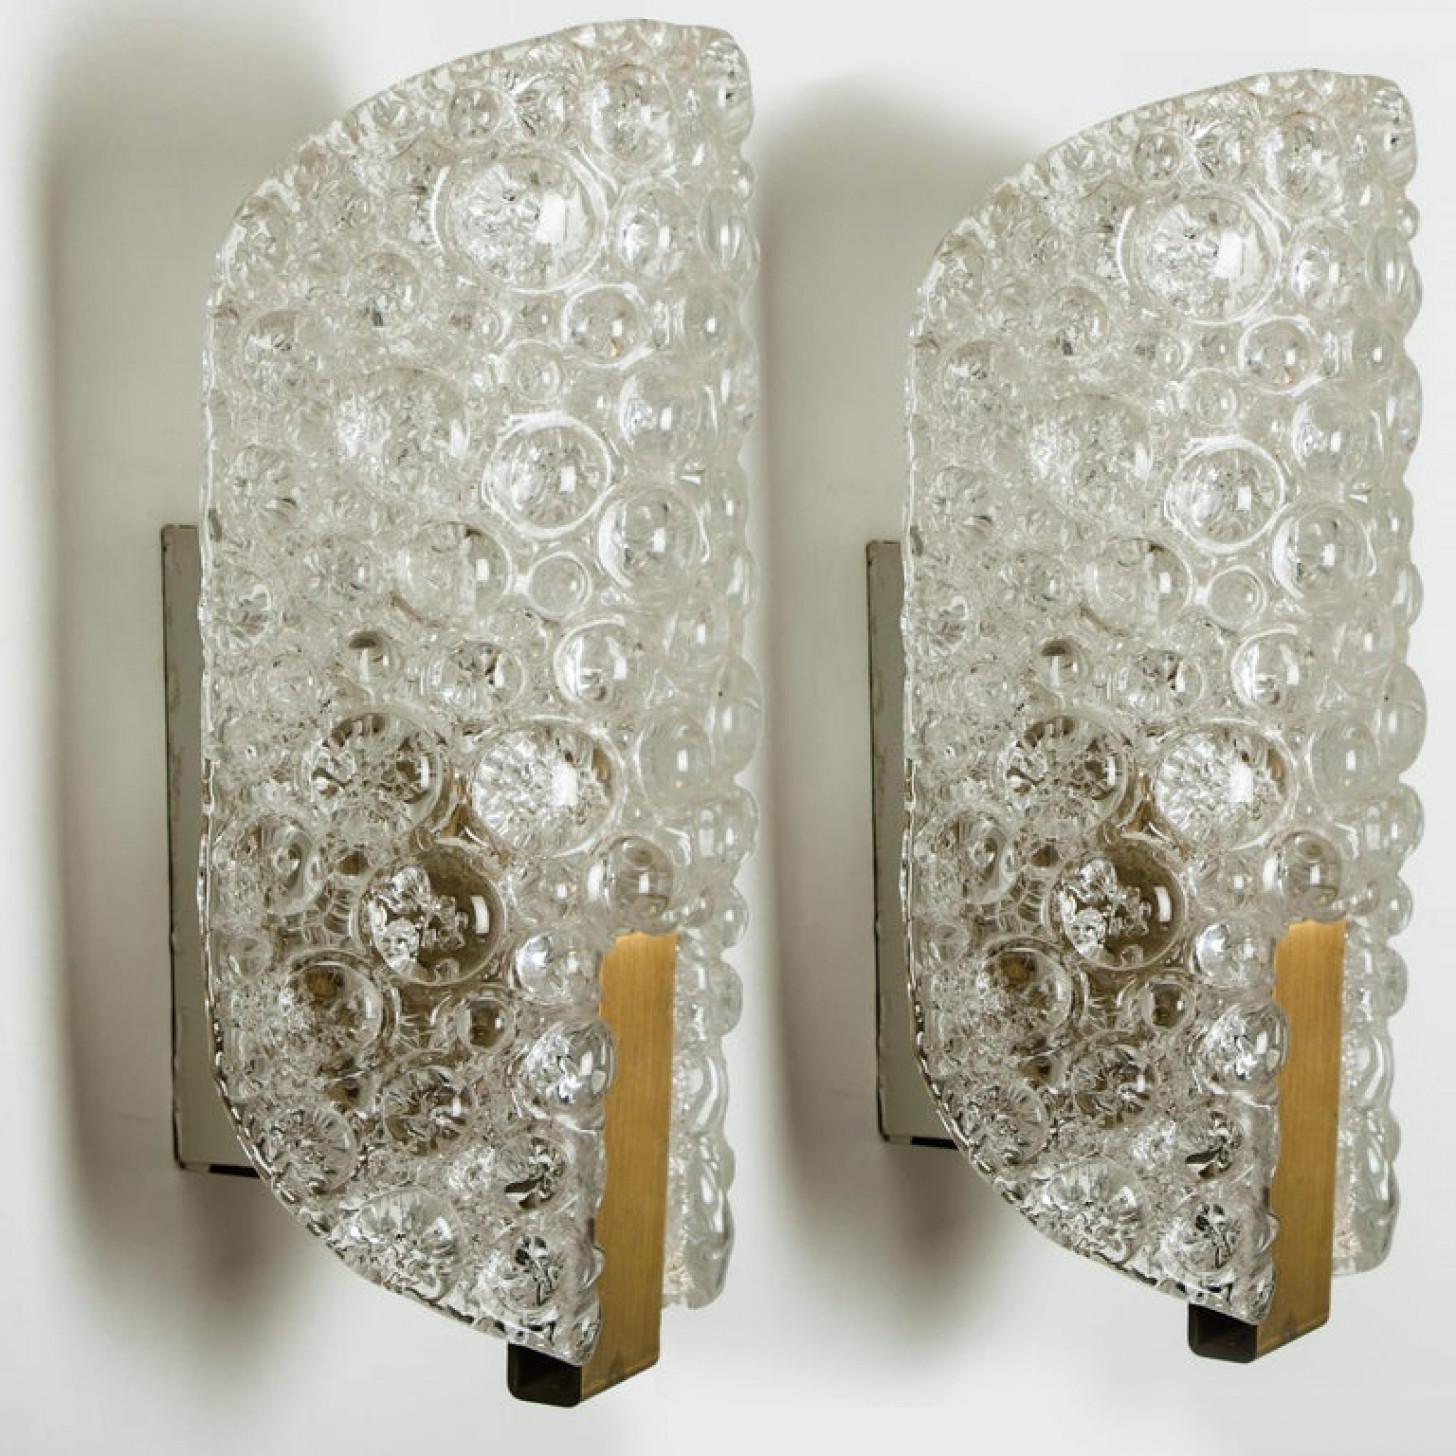 Clean lines to complement all decors. A wonderful high-end Hillebrand wall light fixture with brass detail and thick textured blown glass. The glass plates of the light fixtures are made of tiny glass shards which are molded into the glass during